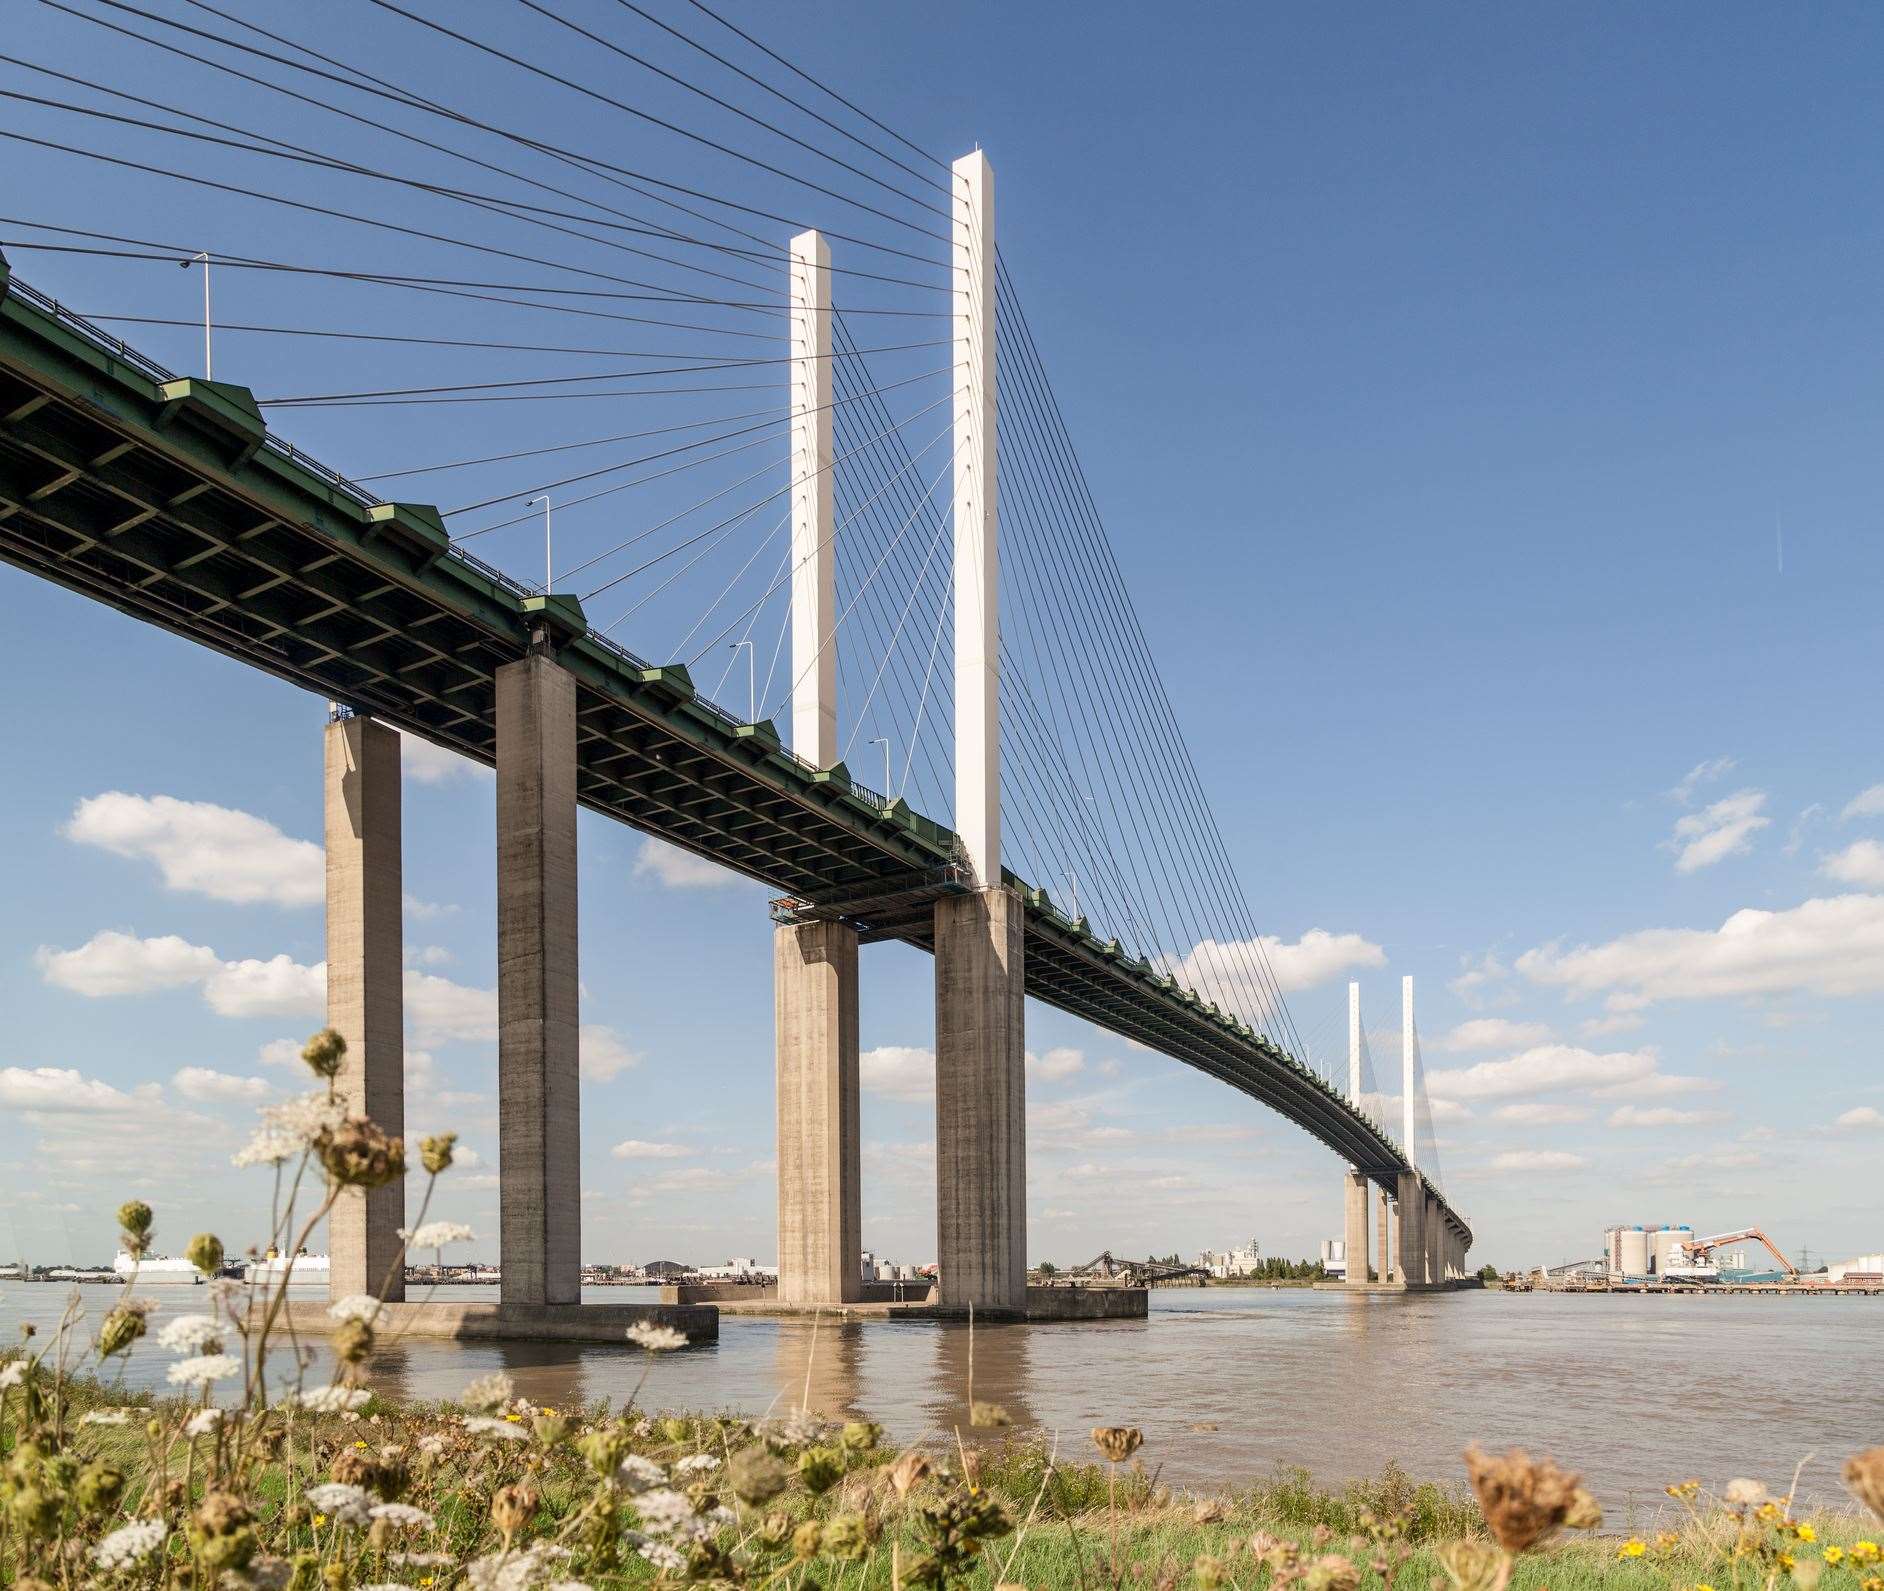 QEII Bridge over the River Thames - part of the Dartford Crossing